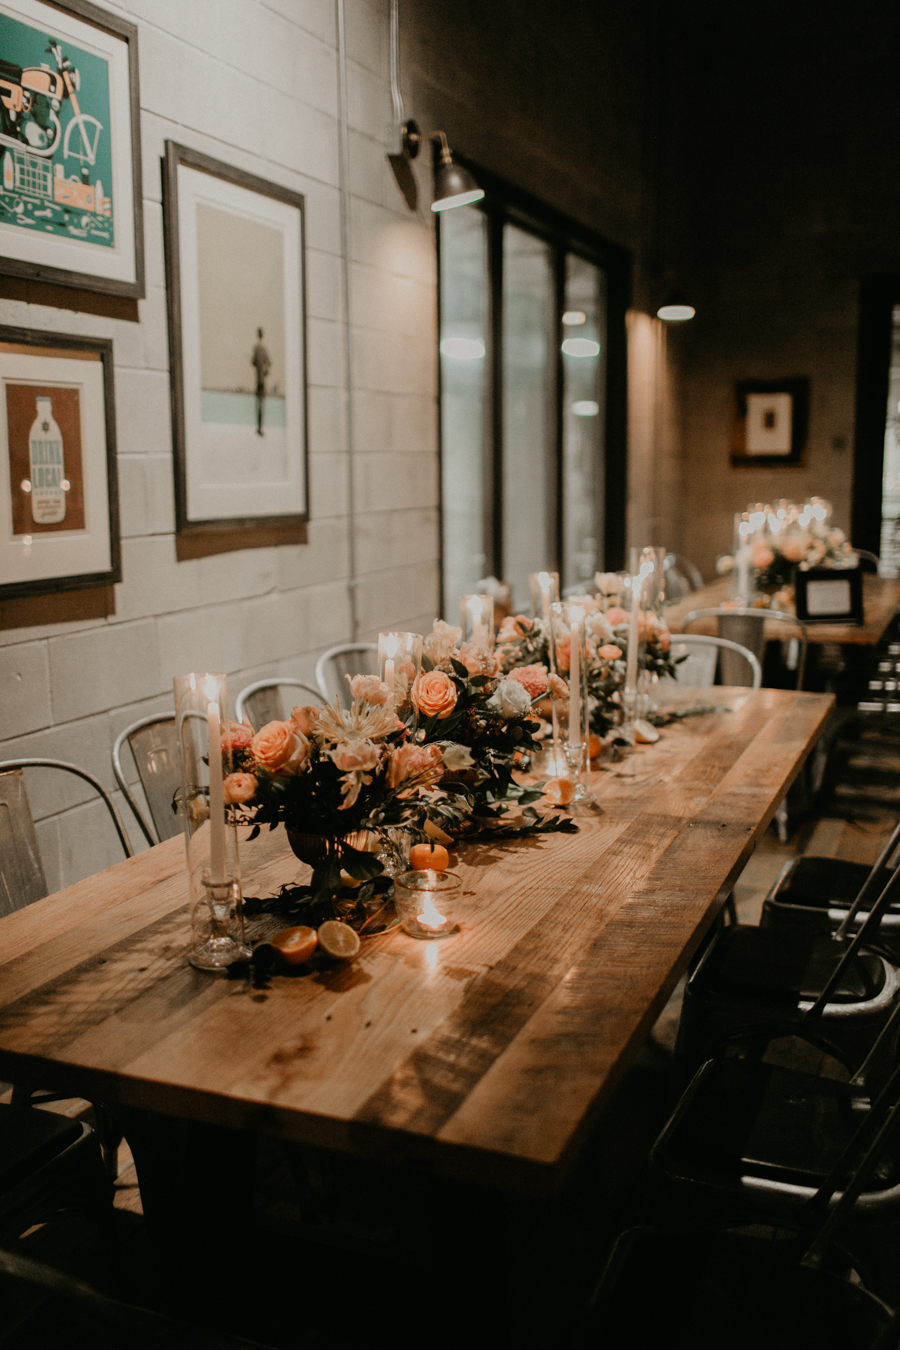 Stephanie And Kent Bailey Tampa Florida Romantic Wedding At Coppertail Brewery in Ybor Florist Fire BHLDN Mis En Place Ibex String Quartet Let Them Eat Cake -96.jpg